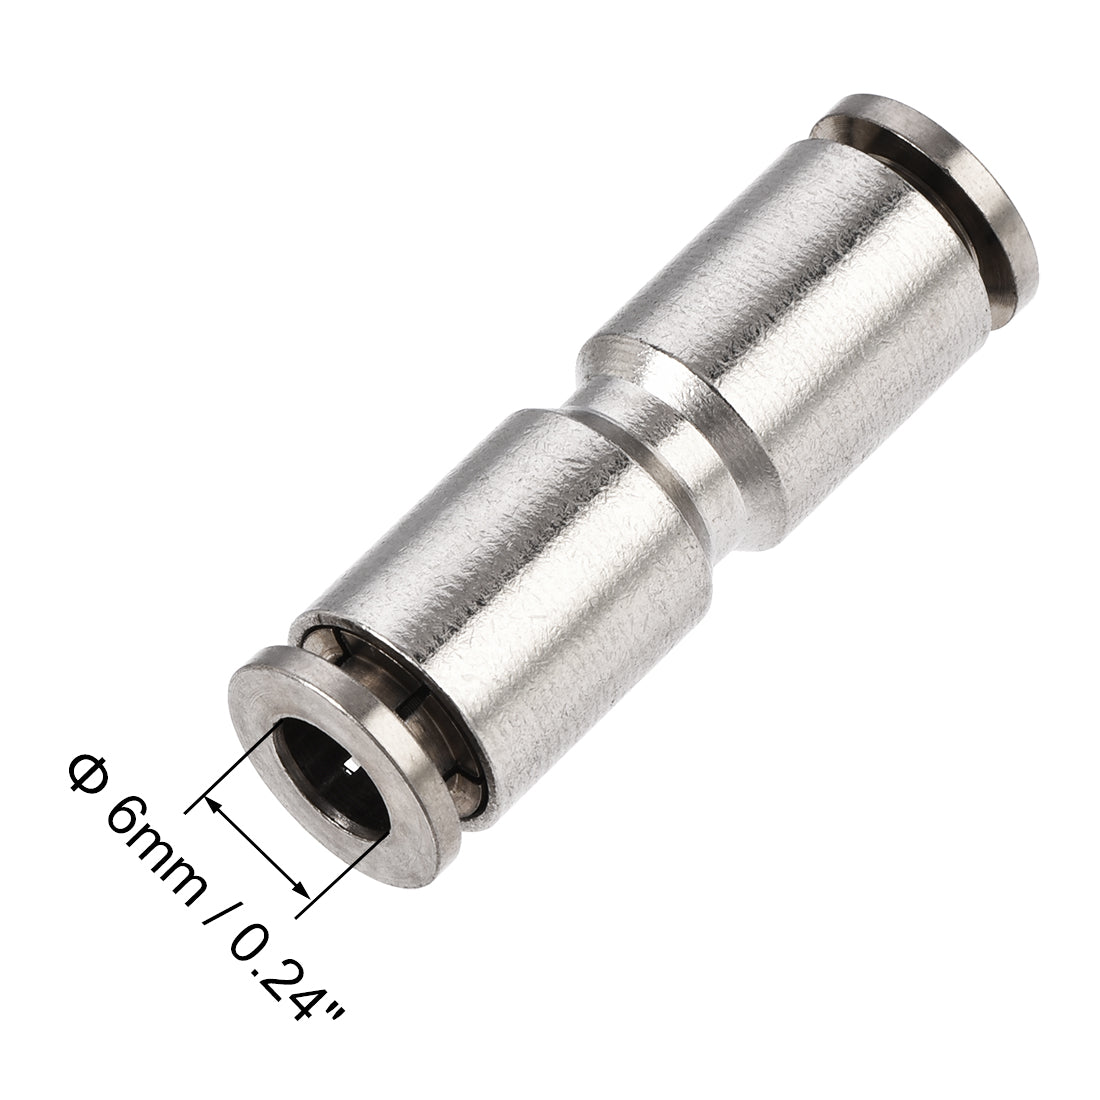 uxcell Uxcell Push to Connect Tube Fitting Straight Pneumatic Connector for 6mm OD Tube 2pcs